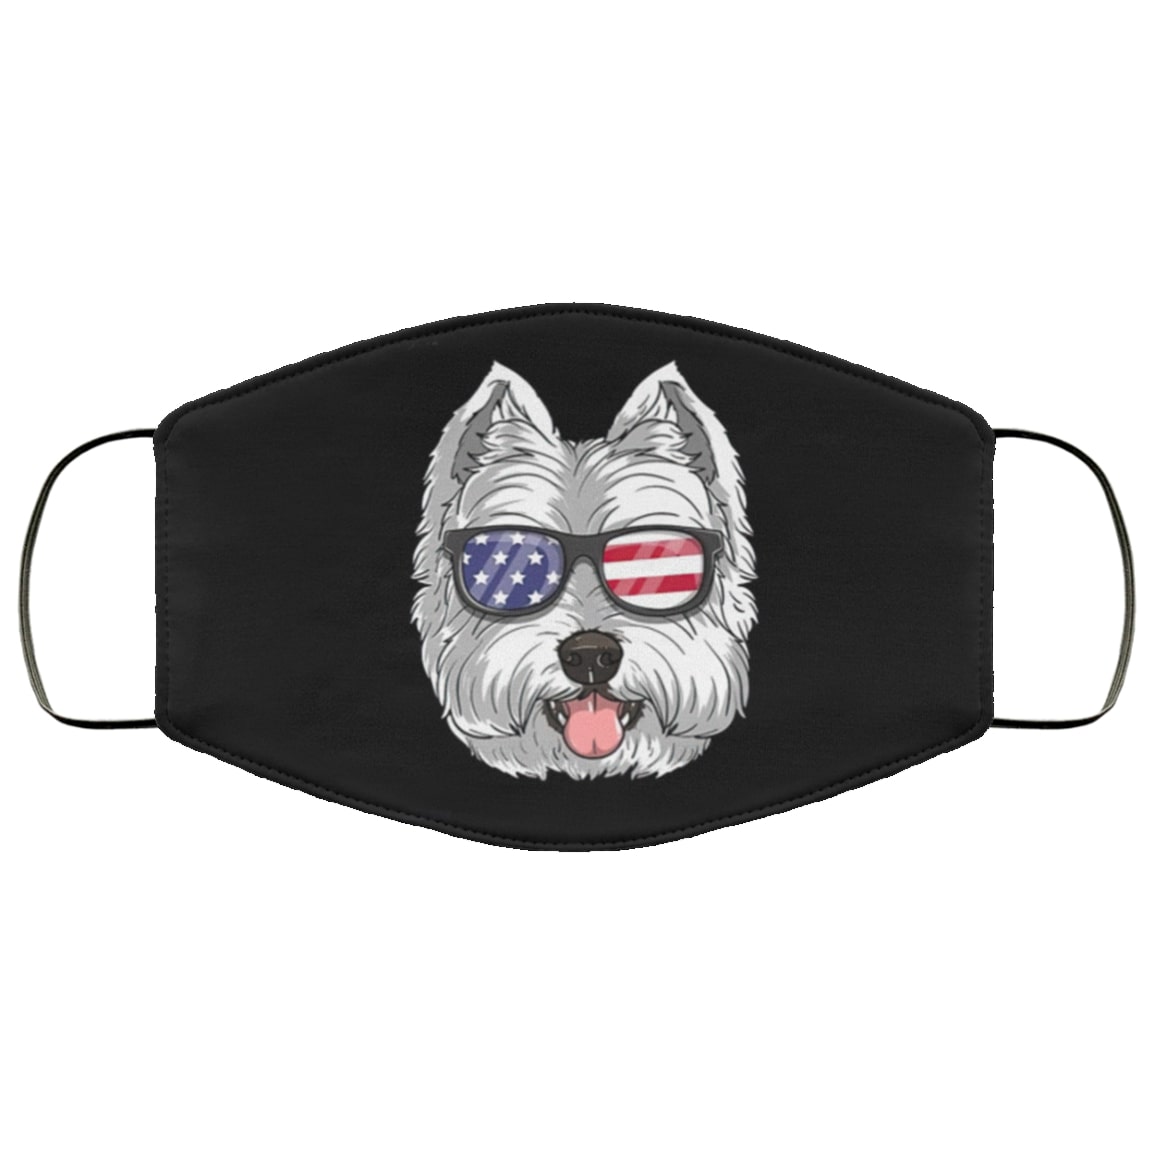 West highland white terrier dog 4th of july american westie usa flag face mask - maria